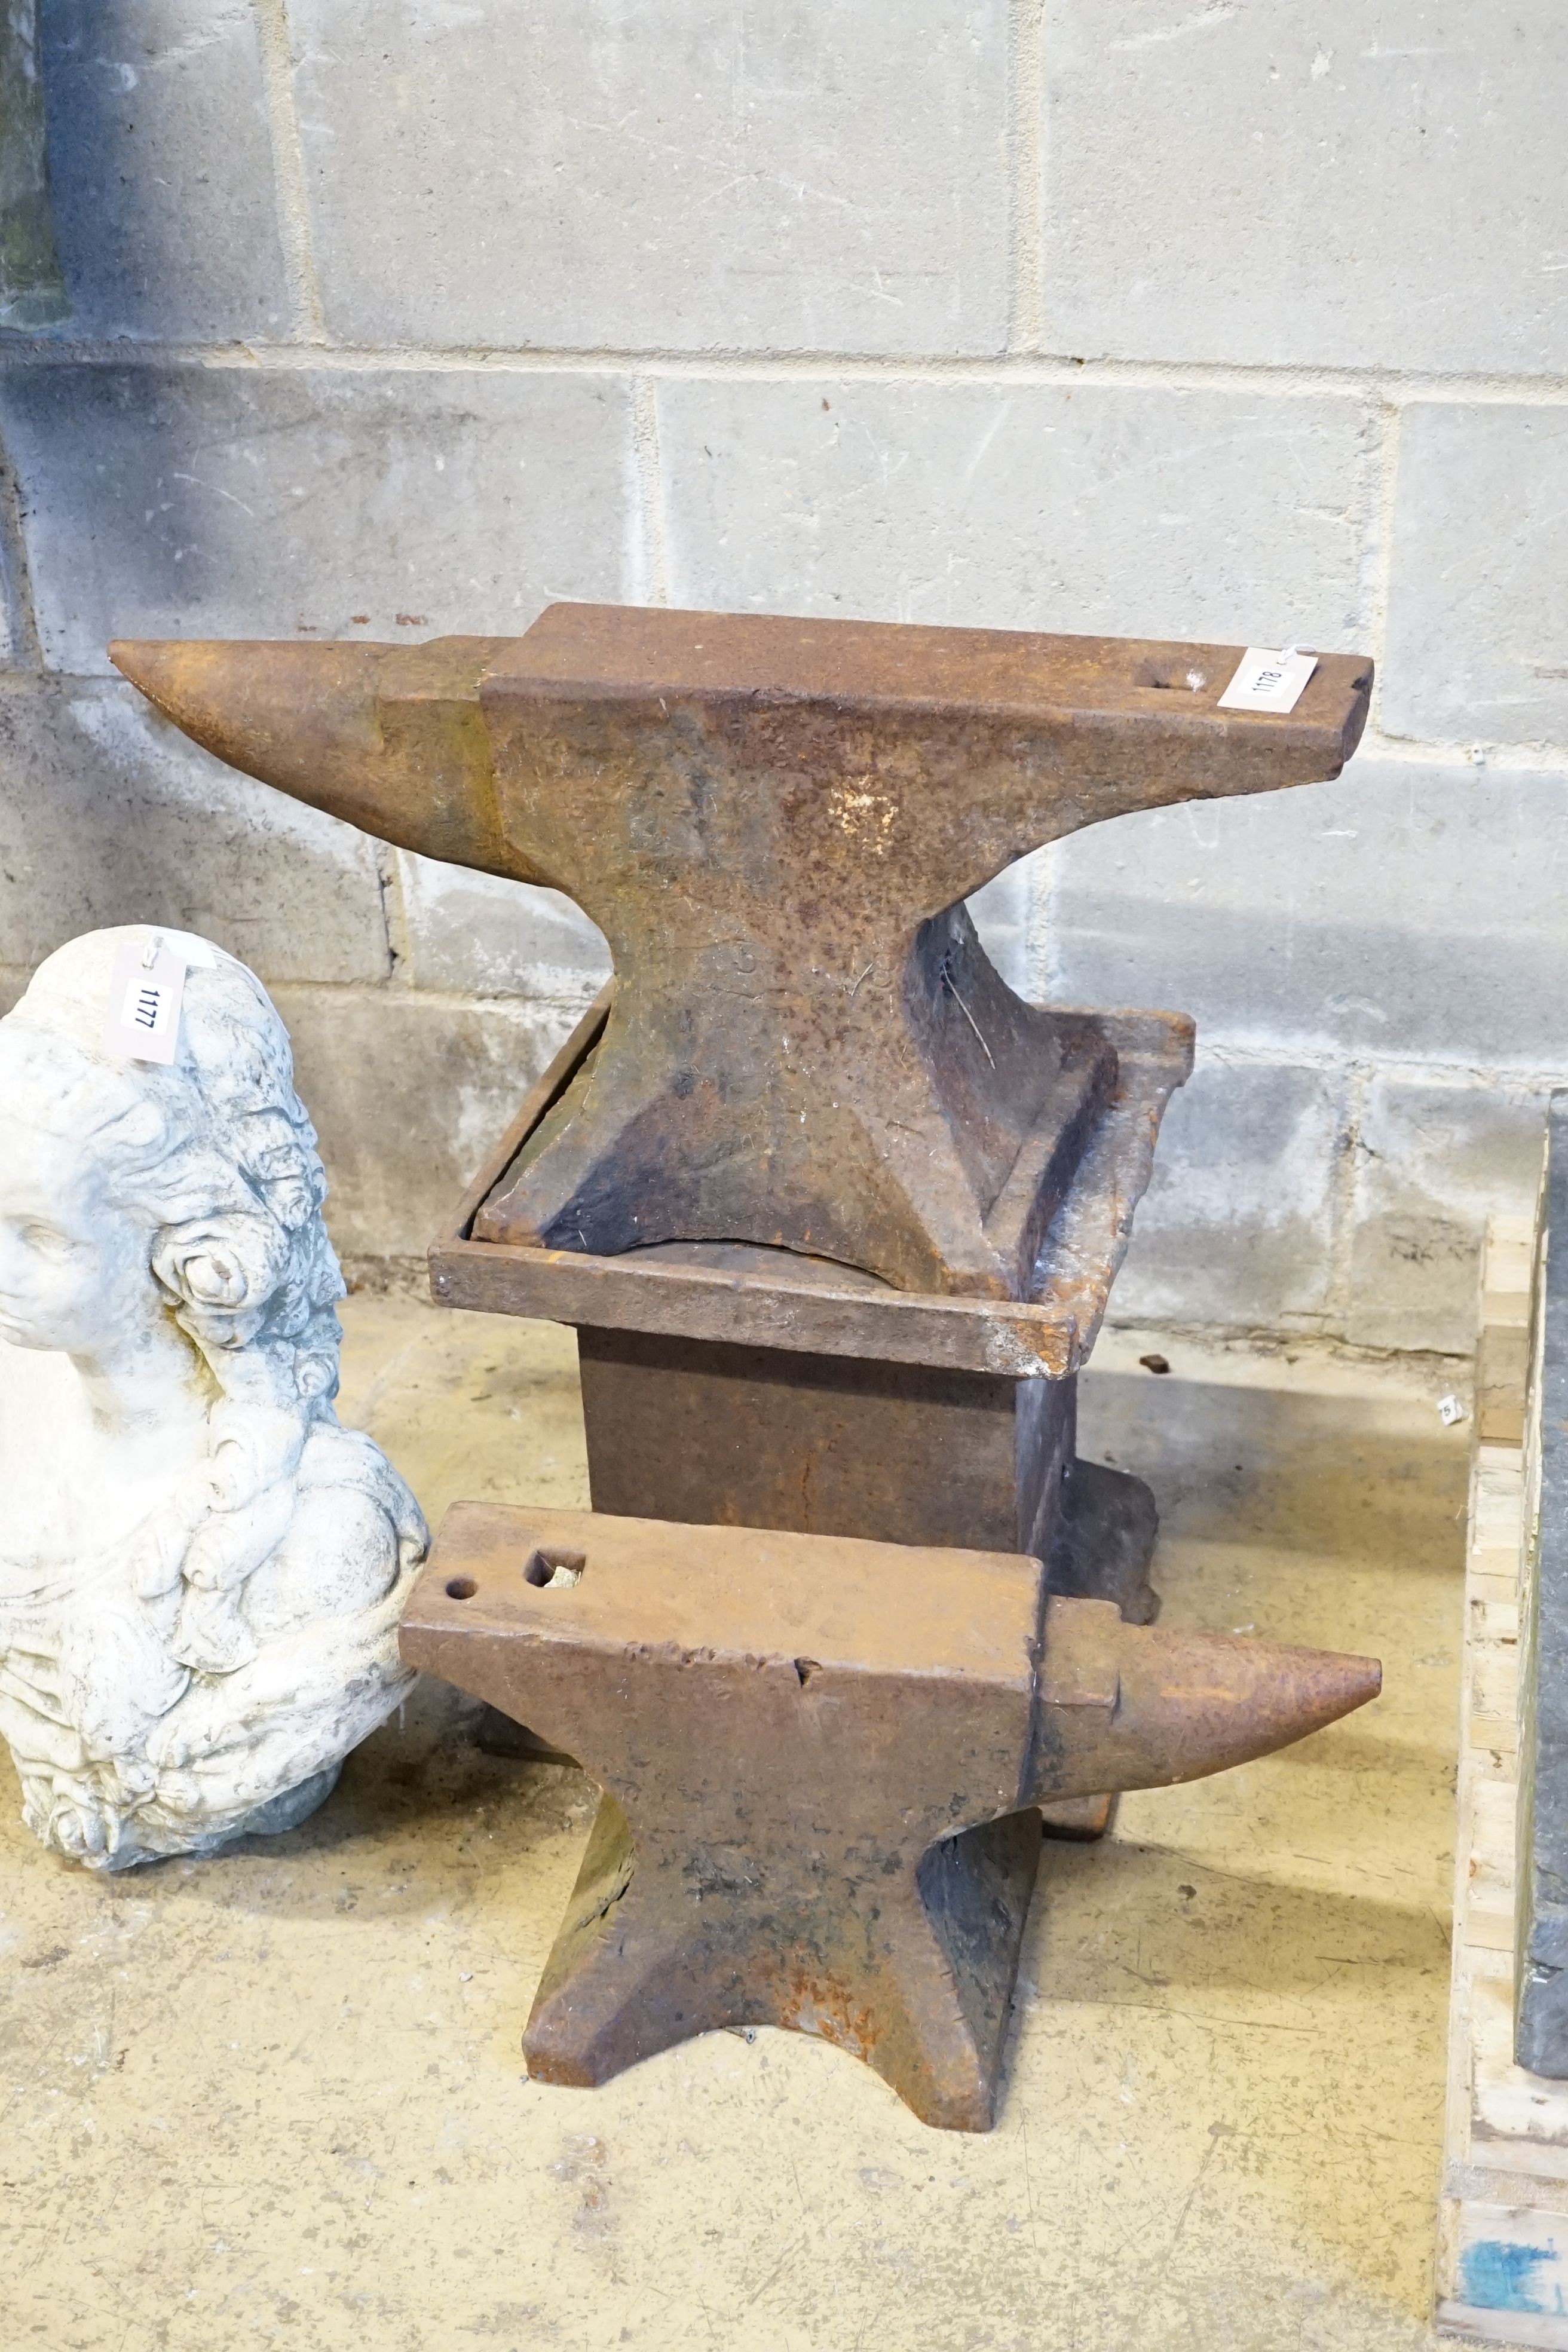 A cast iron anvil on stand, width 68cm, height 65cm and a smaller anvil, width 48cm